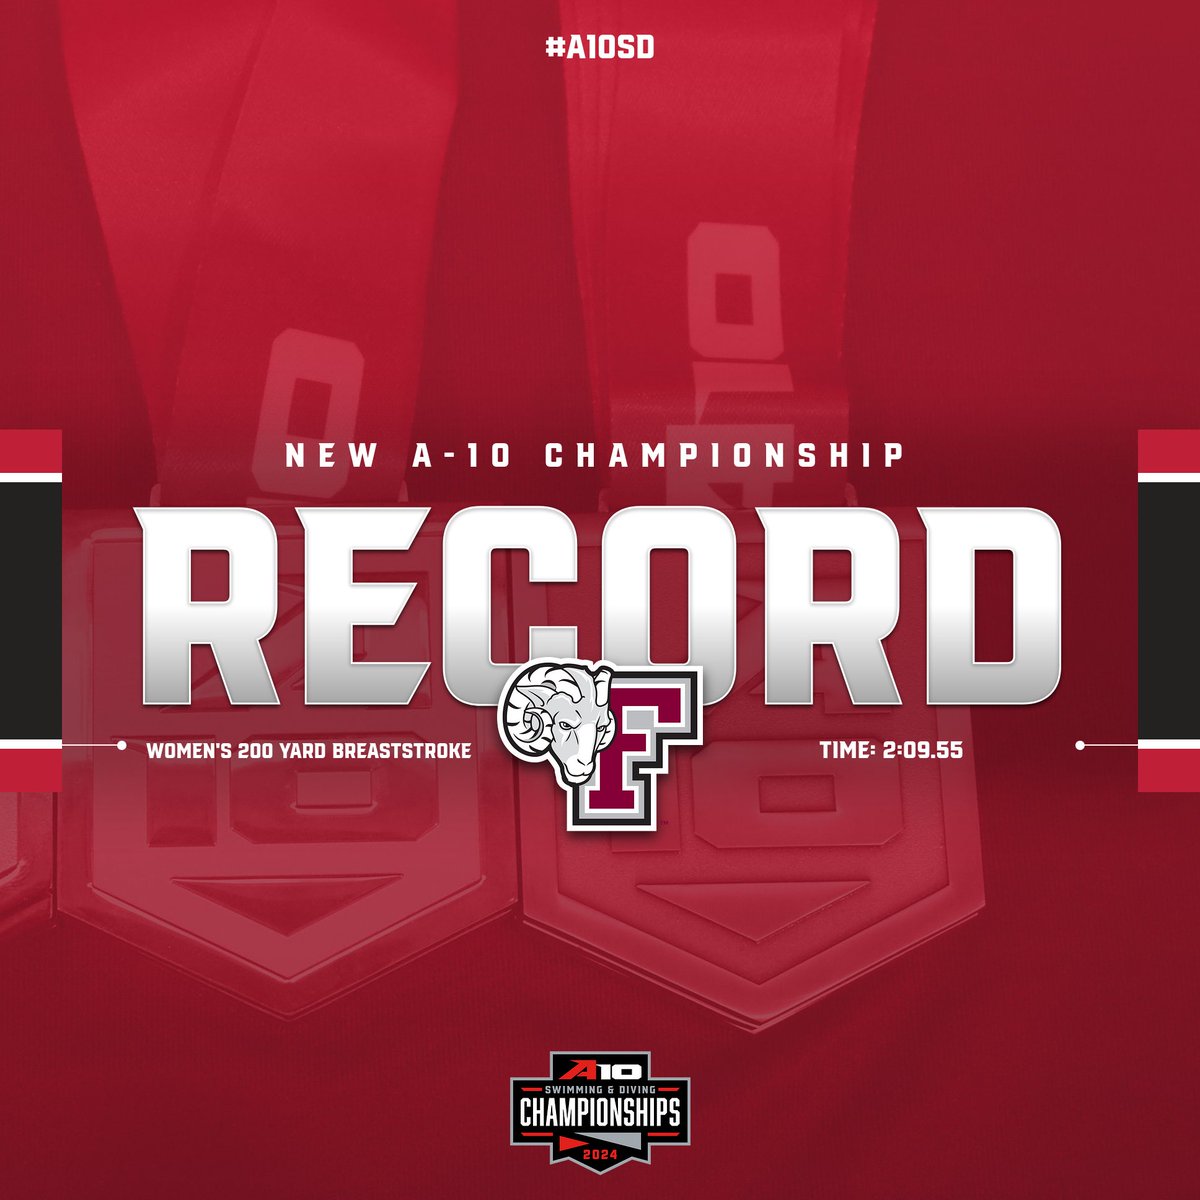 Records are falling on Saturday night!! @FordhamSwimming's Ainhoa Martin sets the #A10SD record in the 200-breaststroke with a 2:09.55 swim!